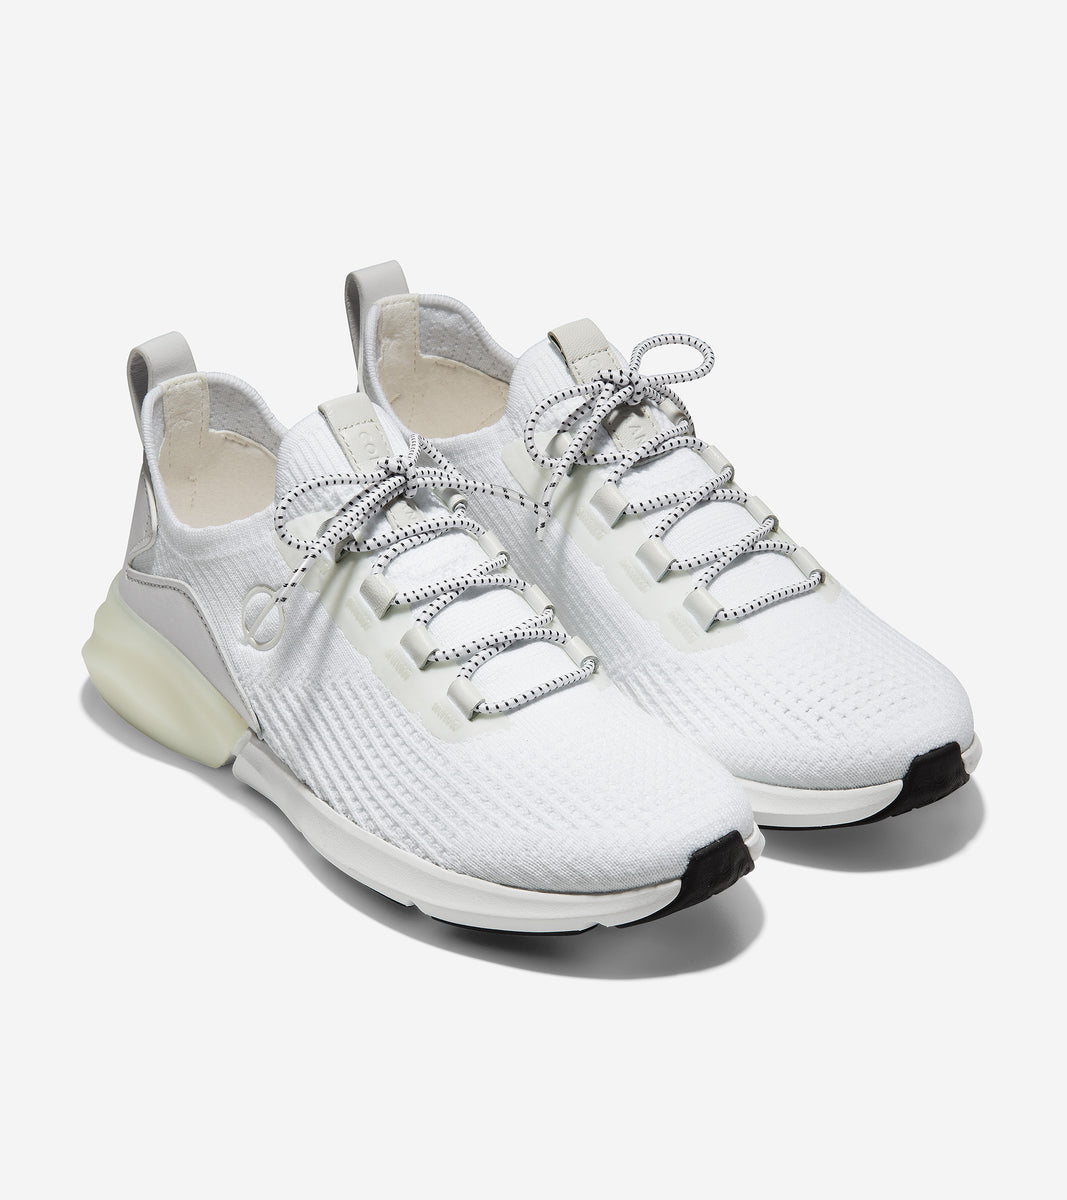 ColeHaan-ZERØGRAND All-Day Runner-w18467-Optic White Stitchlite™